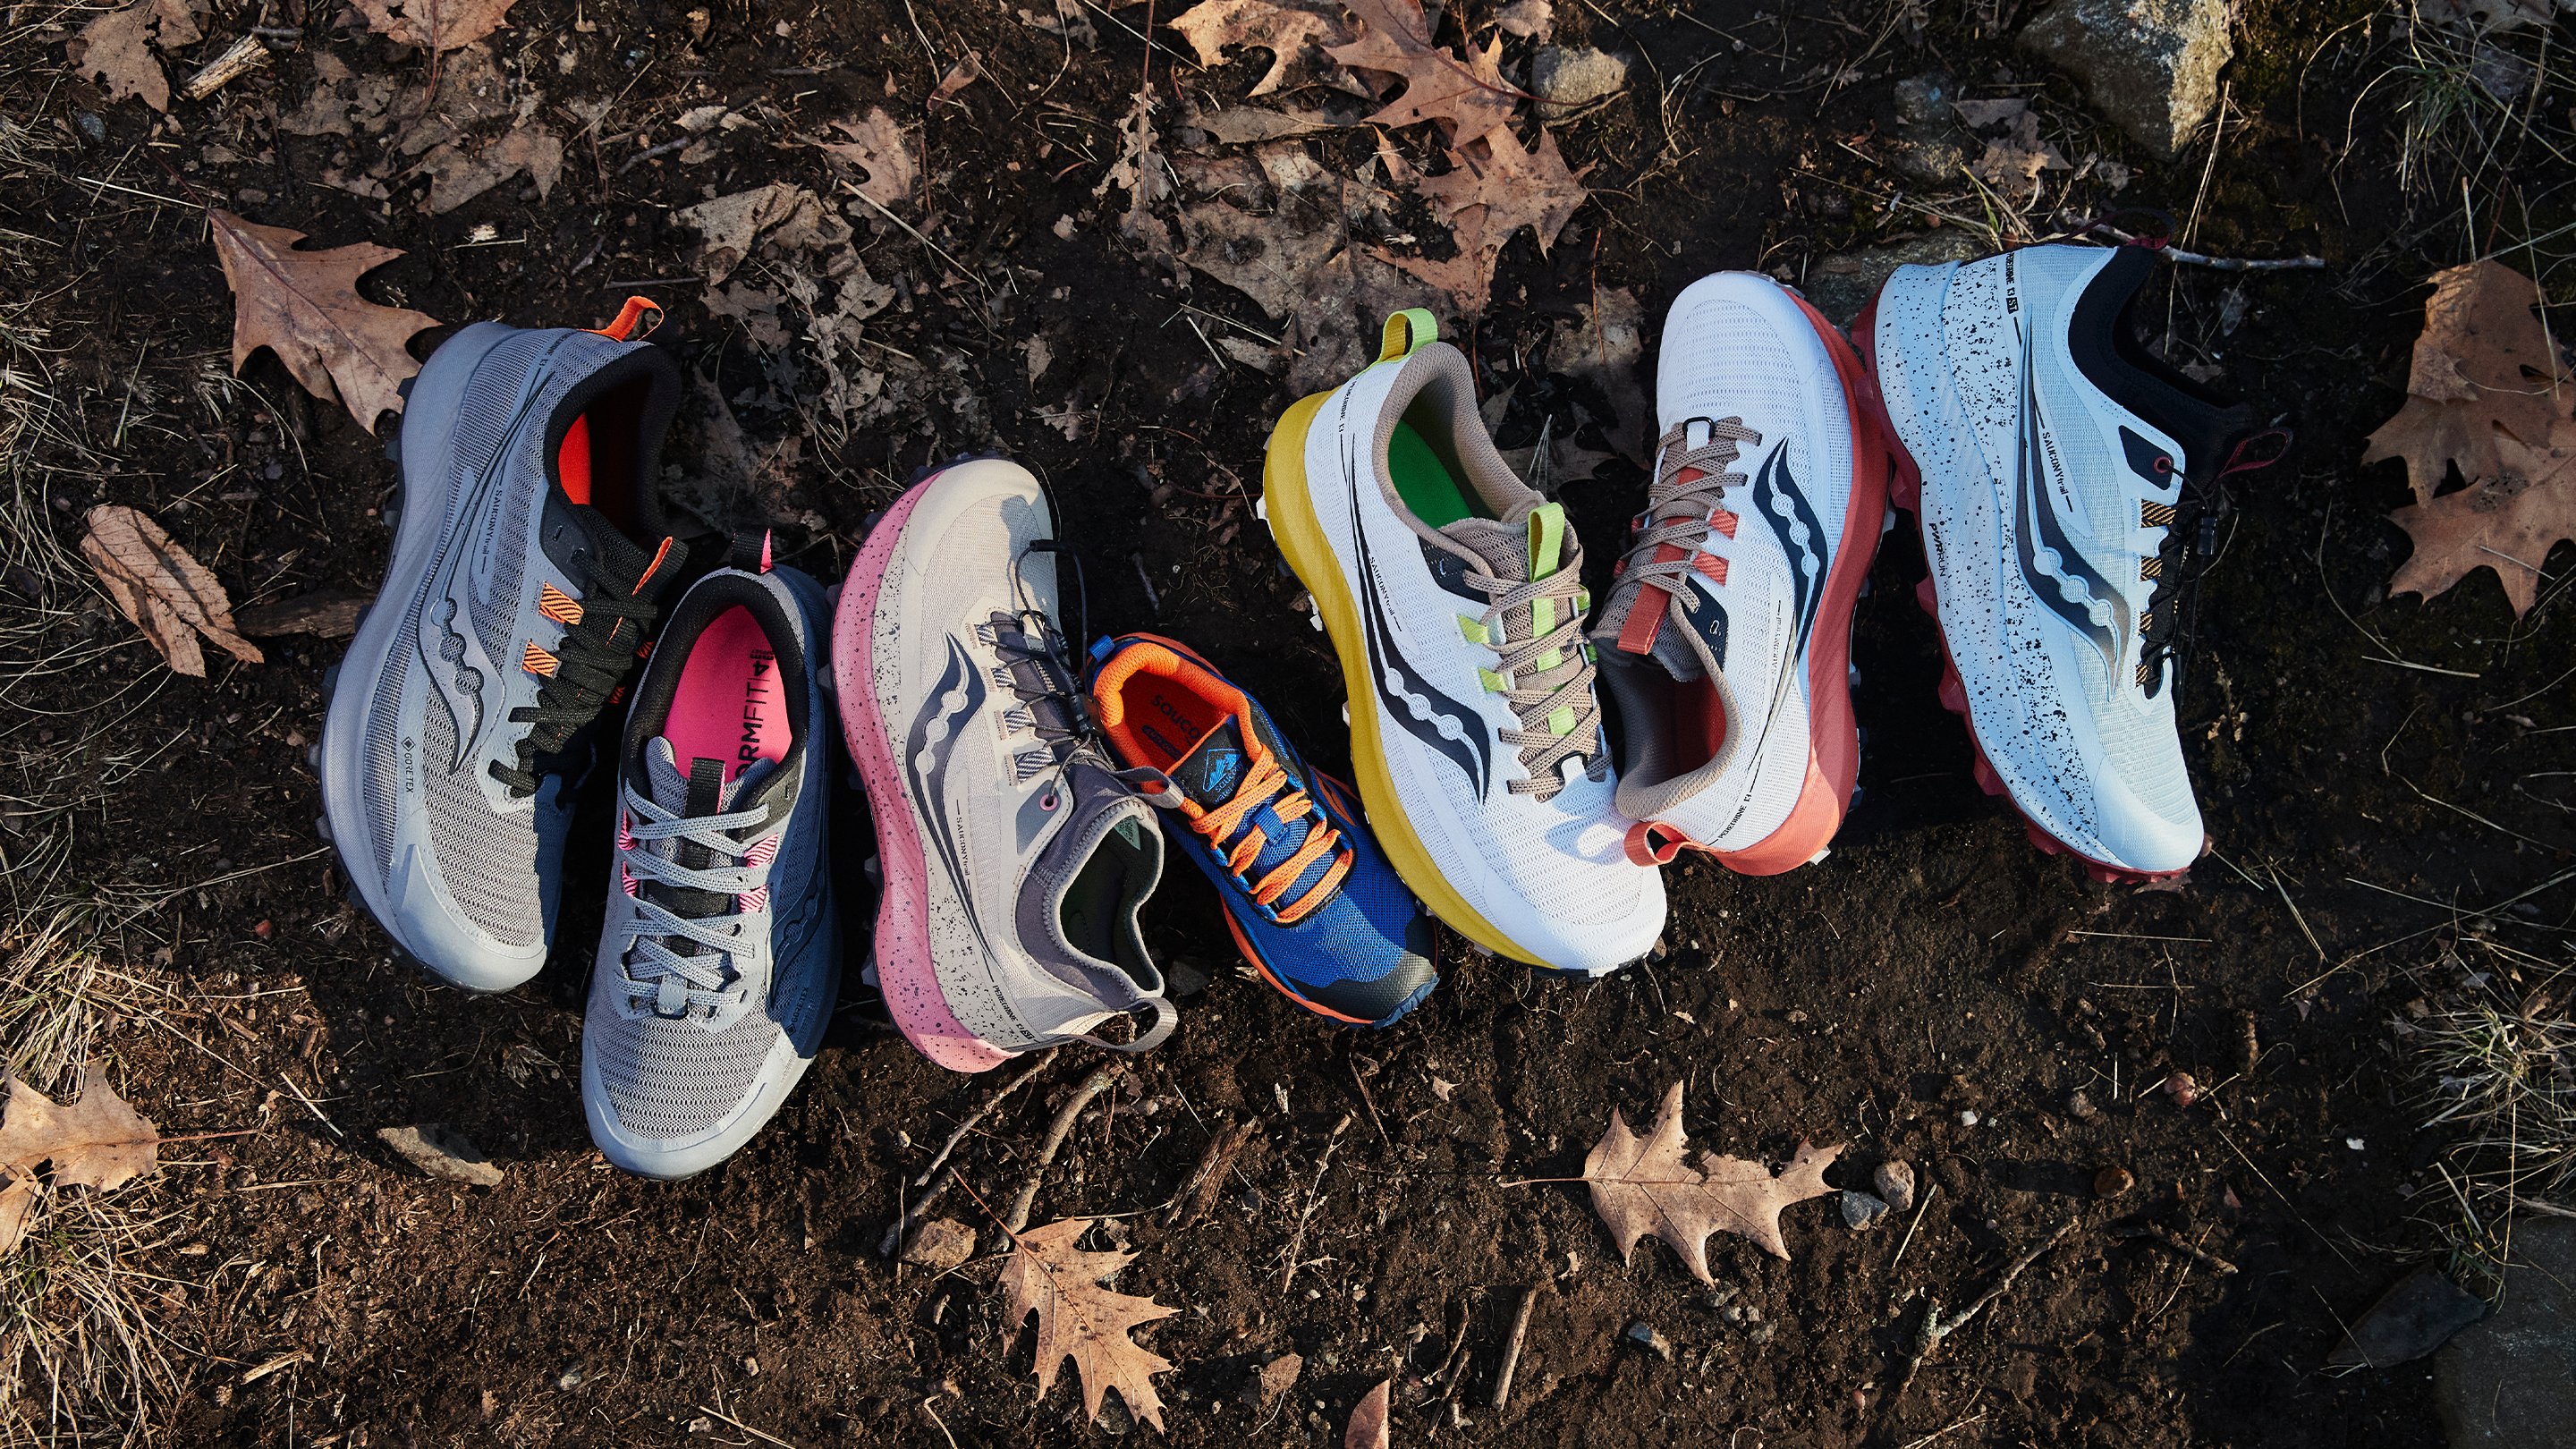 Saucony pergrin shoes laid out in different colors